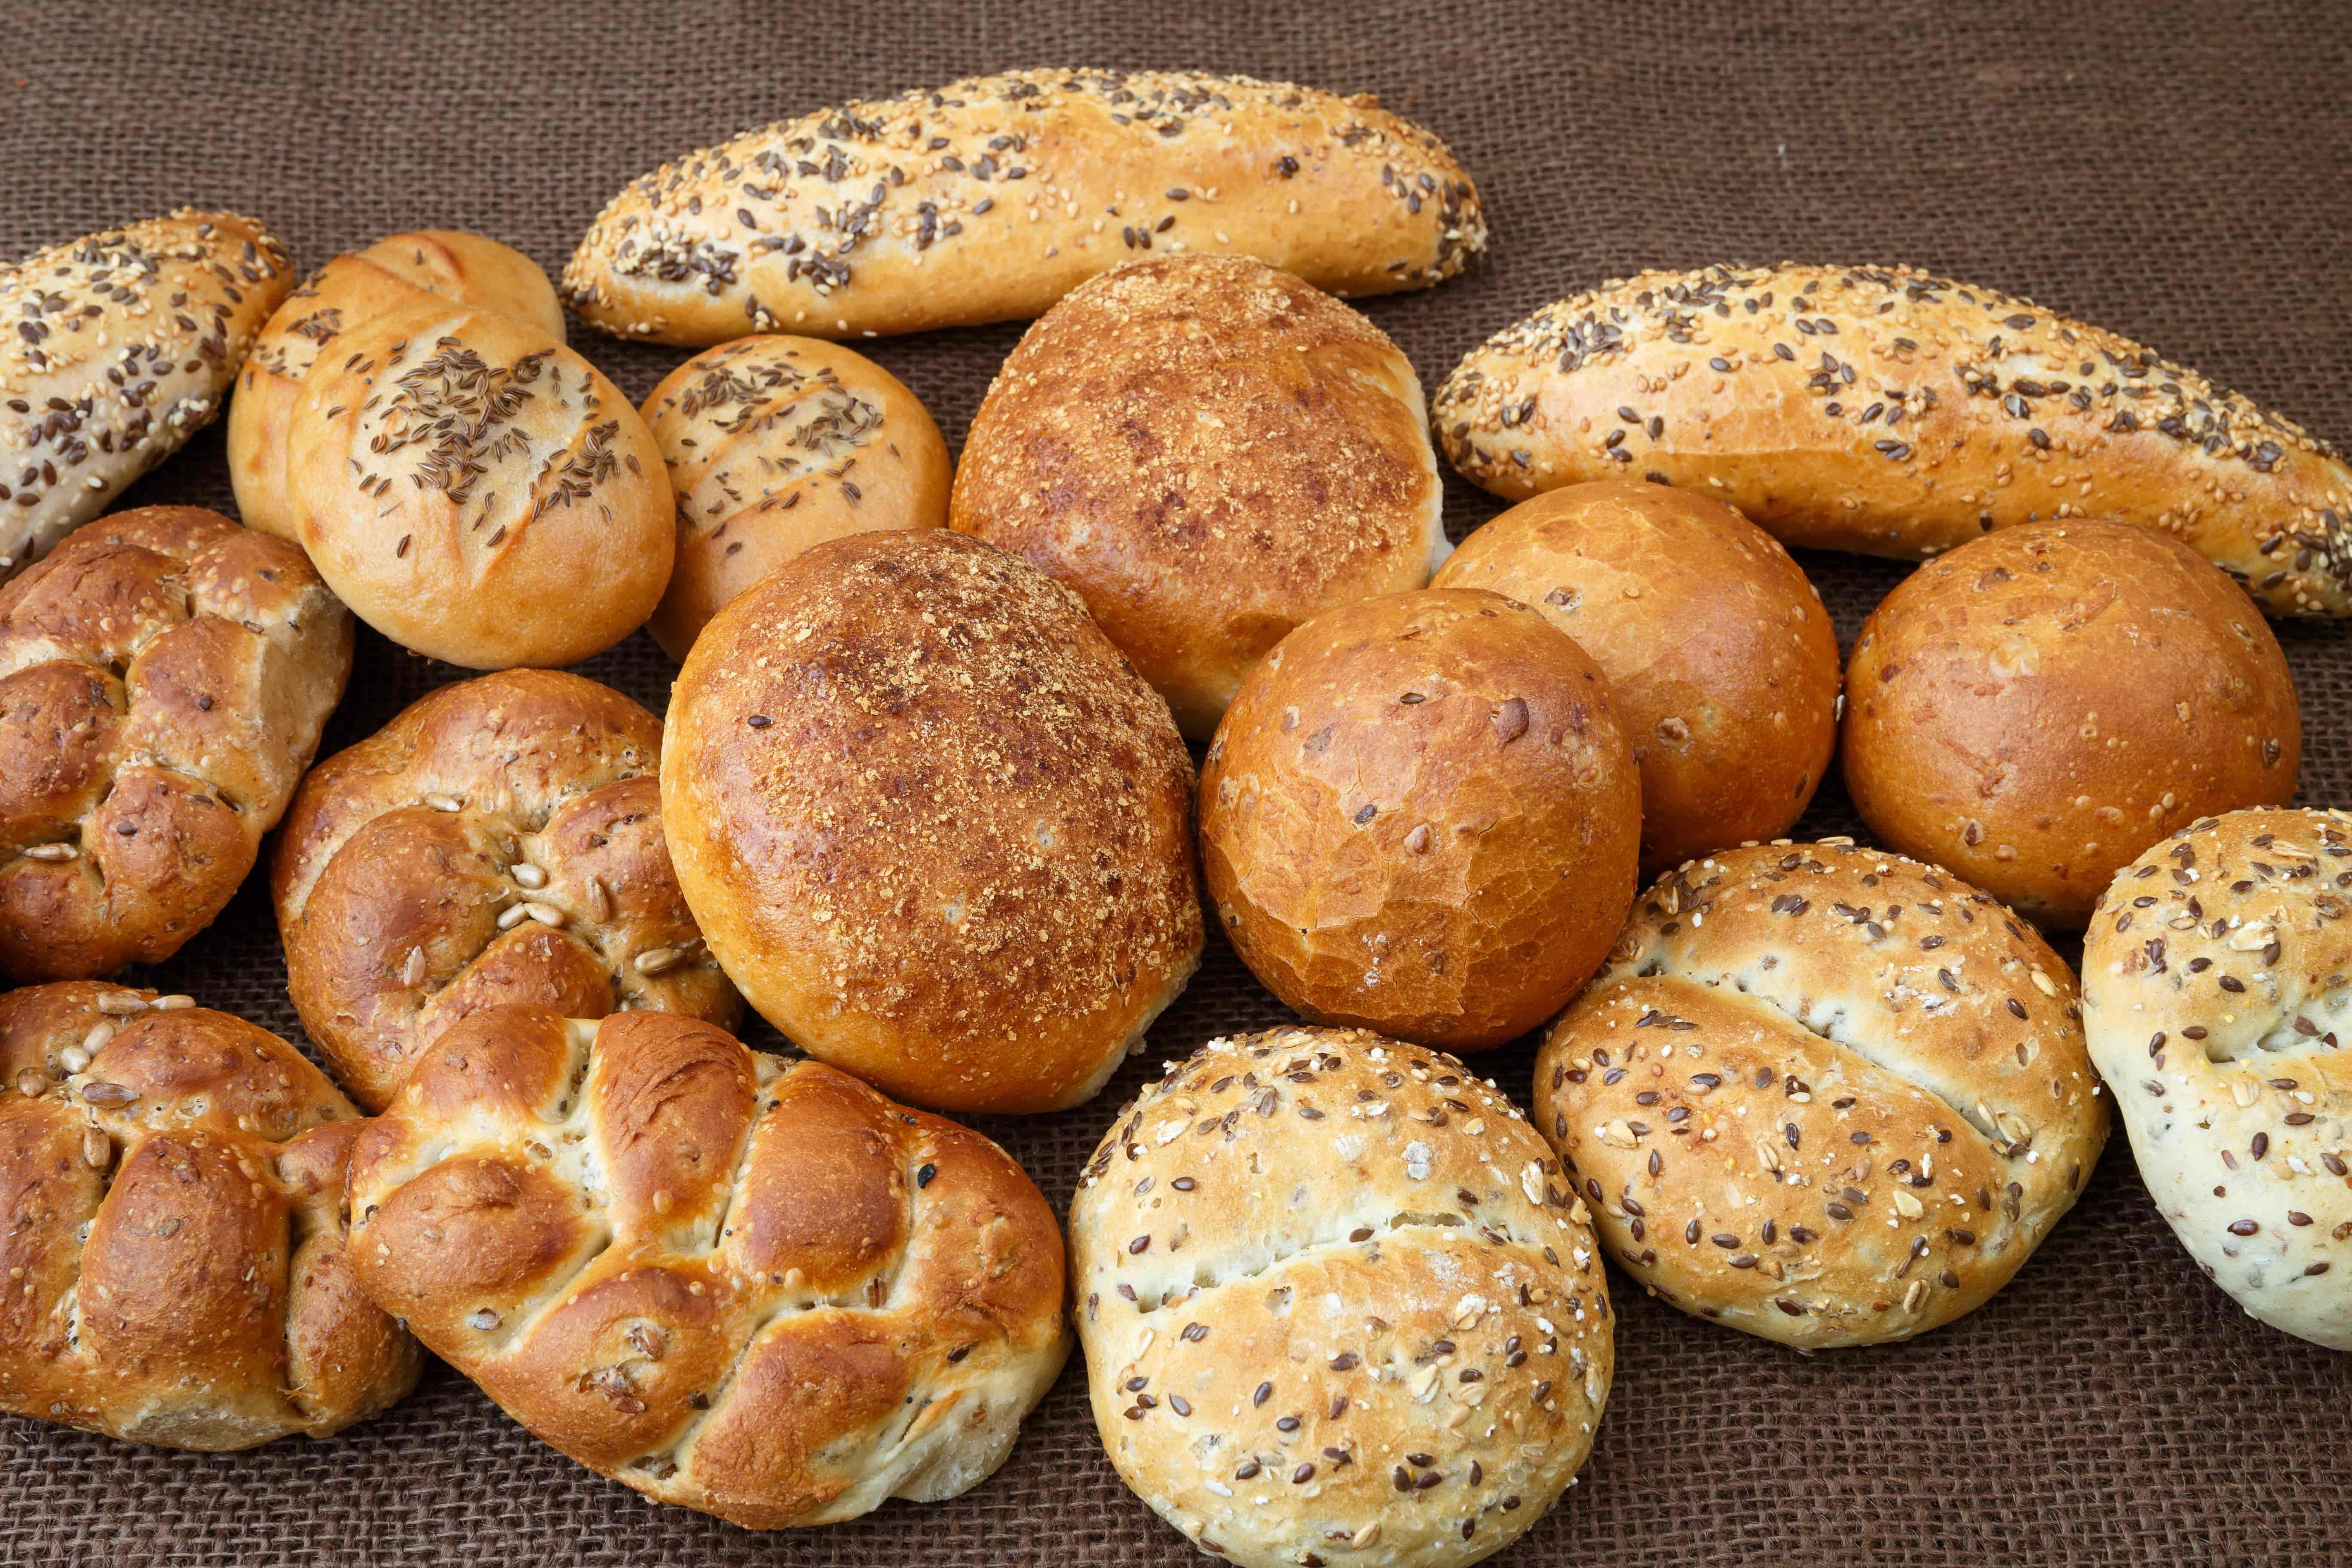 Assorted Dinner Breads and Rolls